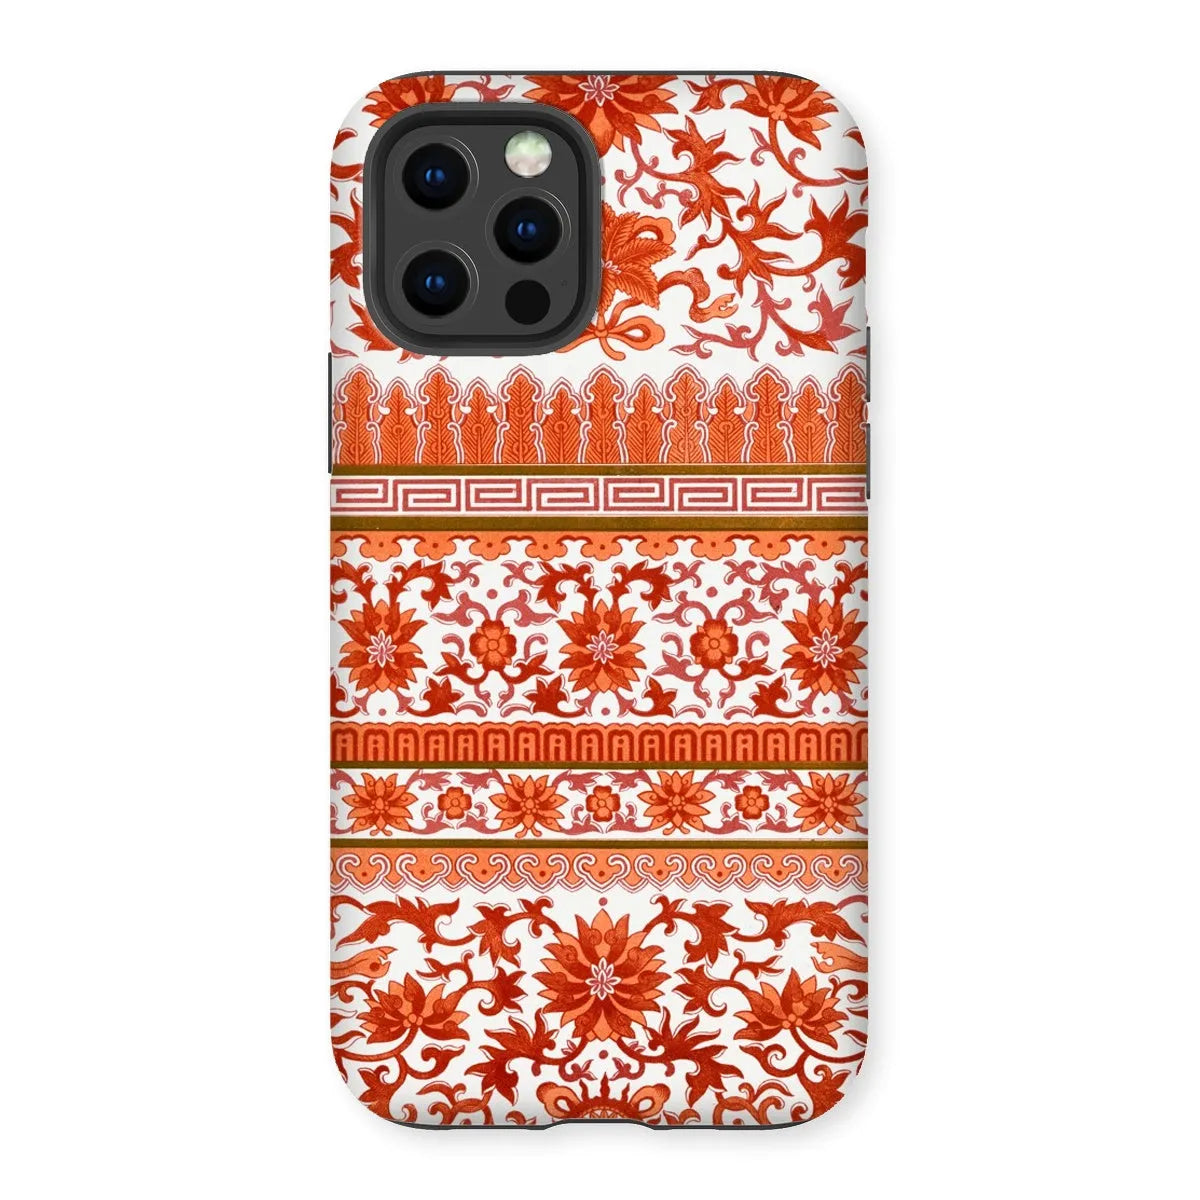 Fiery Chinese Floral Aesthetic Art Phone Case - Owen Jones - Iphone 12 Pro / Matte - Mobile Phone Cases - Aesthetic Art